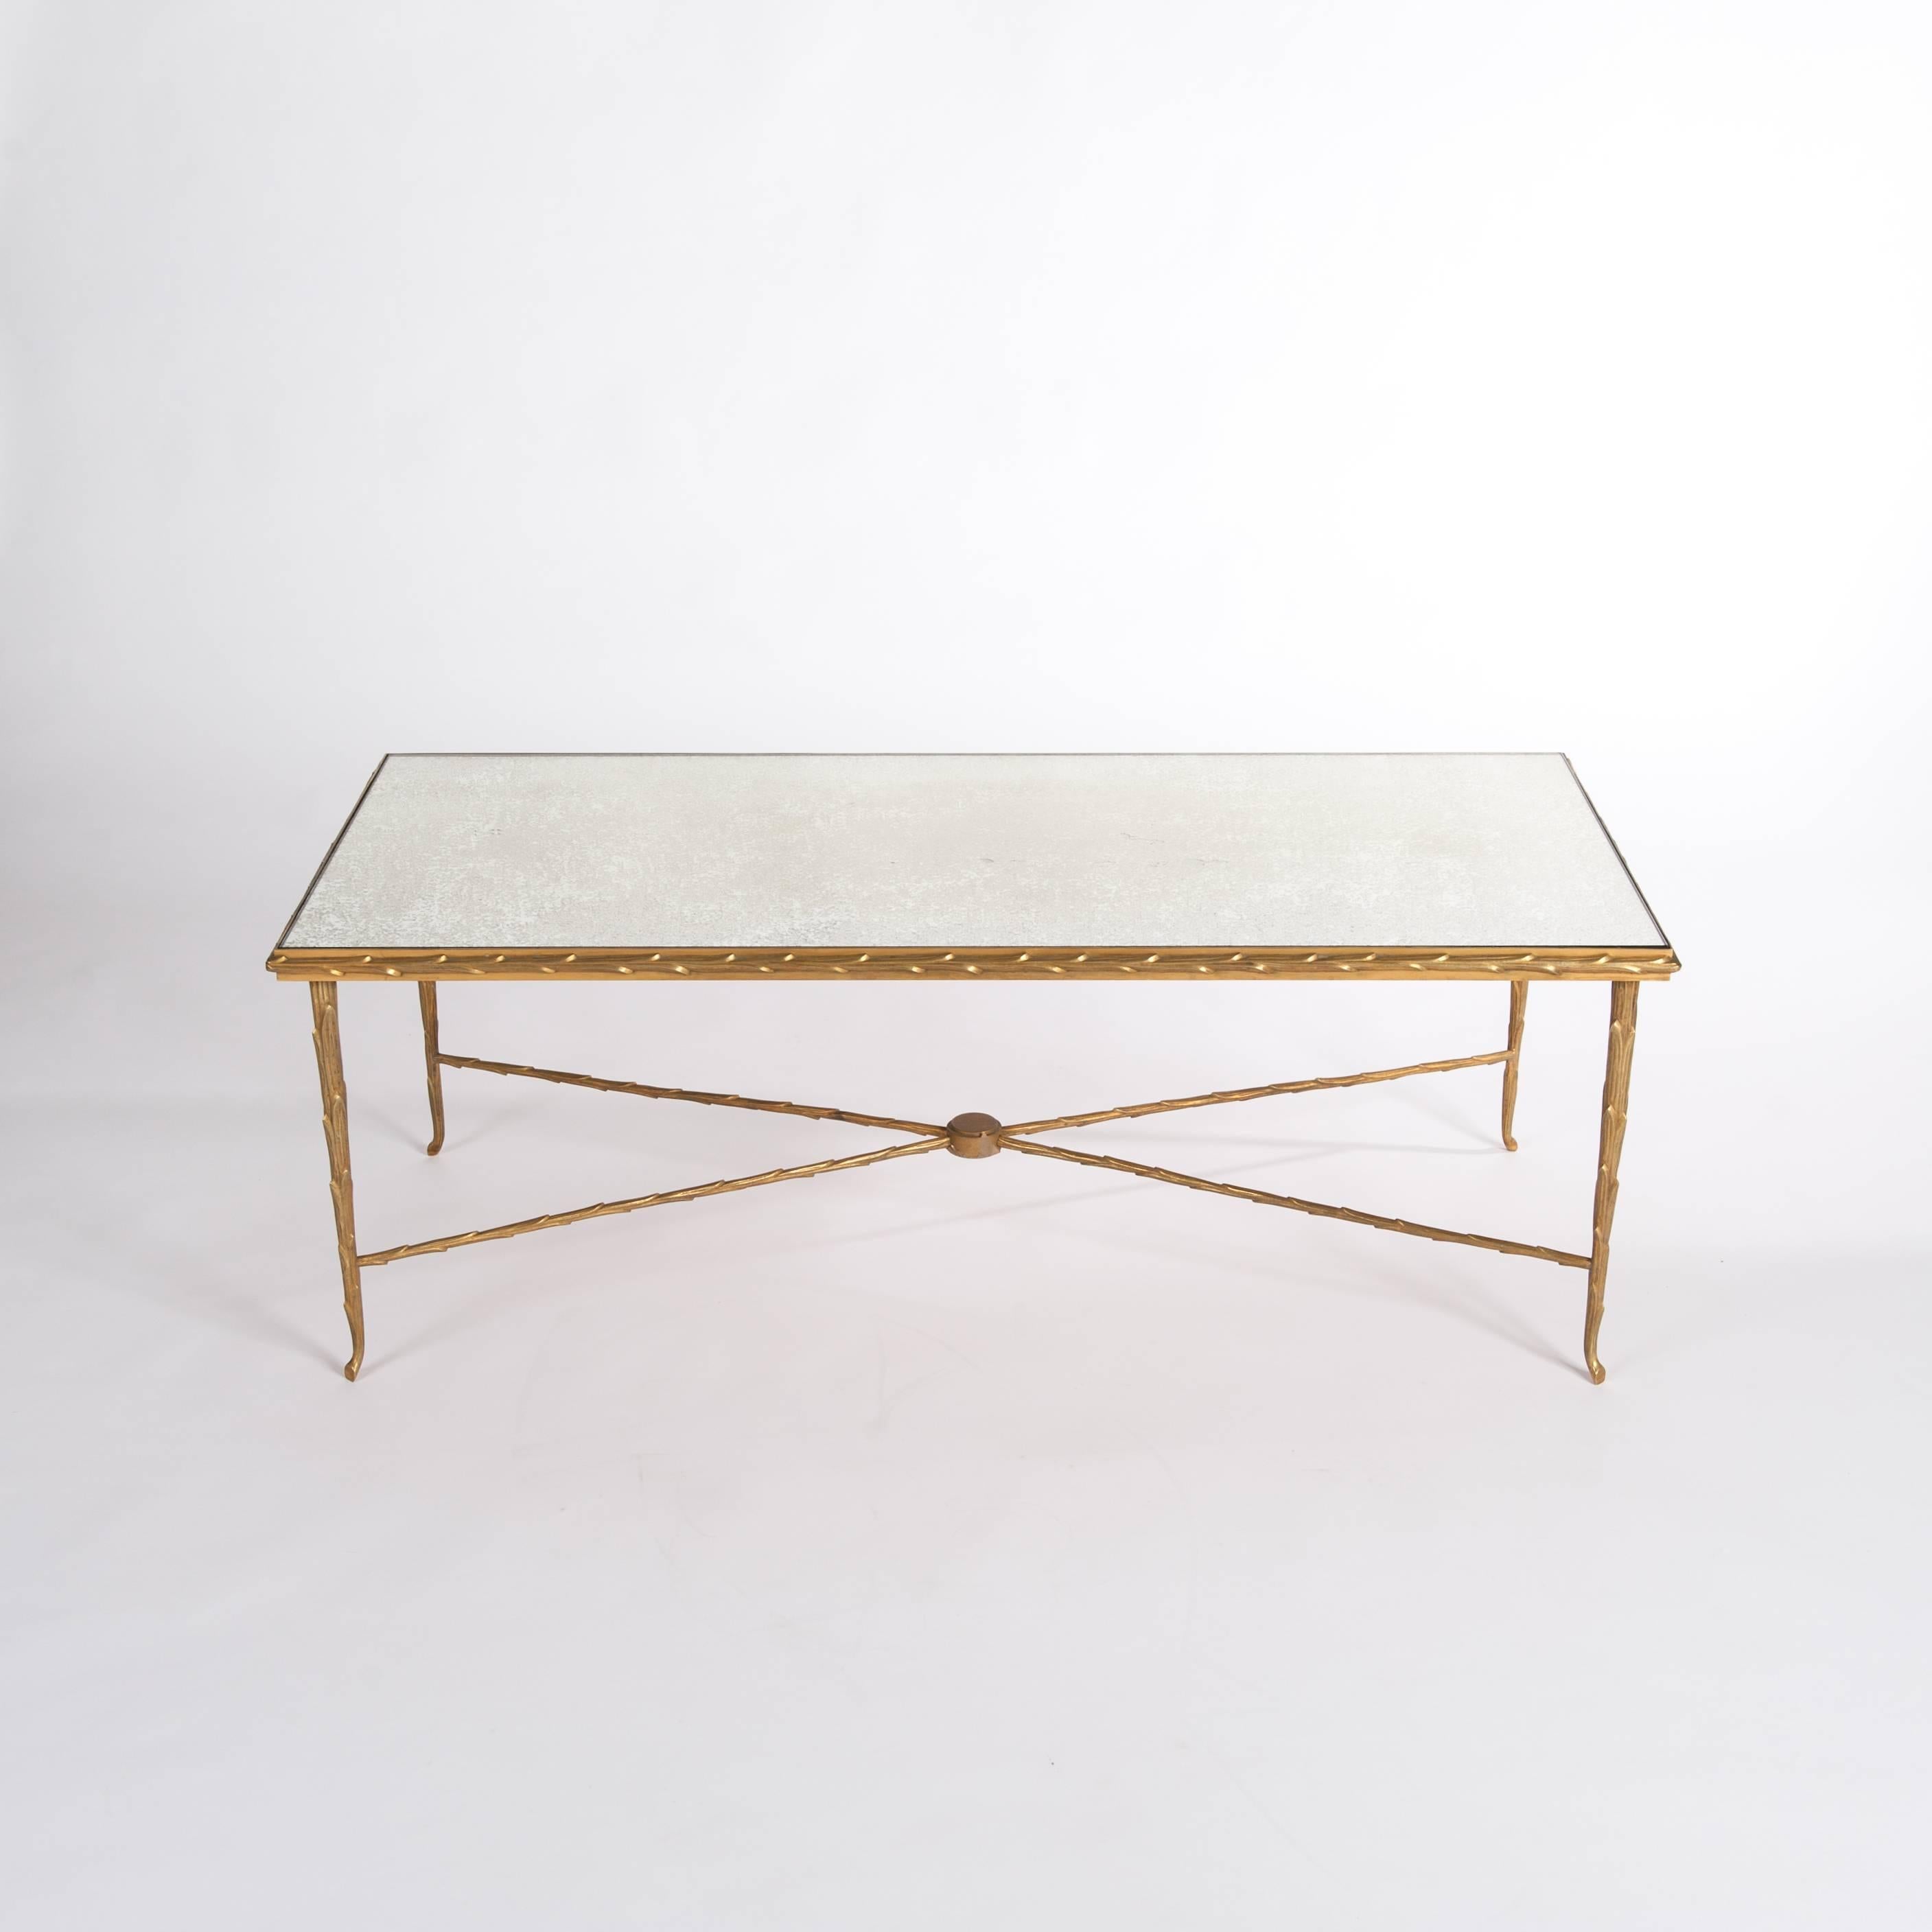 Rectangular bronze - gilt sofa table attributed to Maison Jansen, circa 1970.
It stands out thanks to the amazing detail it was crafted with.
The very fine workmanship presenting recurring palmier decoration gives the
table an especially luxurious